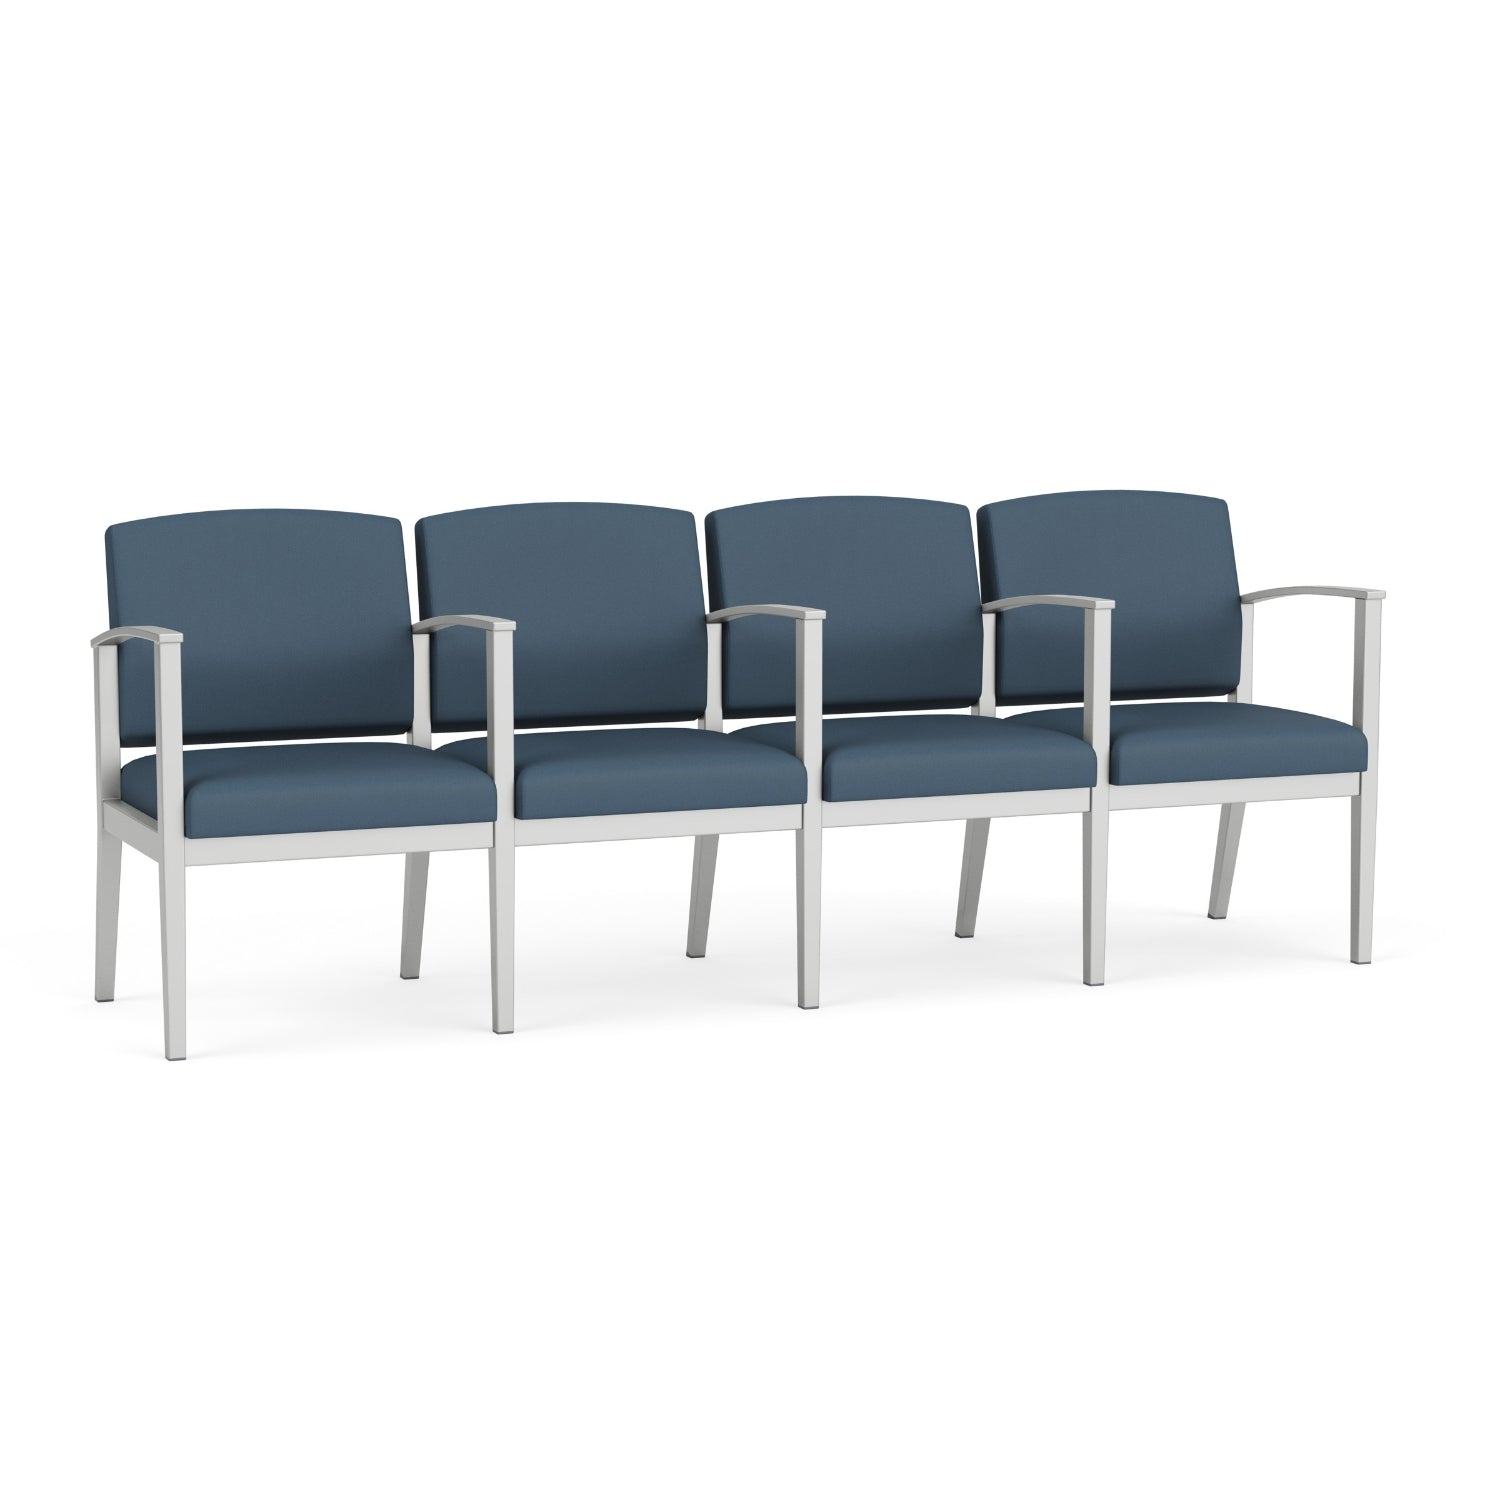 Amherst Steel Collection Reception Seating, 4 Seats with Center Arms, Standard Vinyl Upholstery, FREE SHIPPING